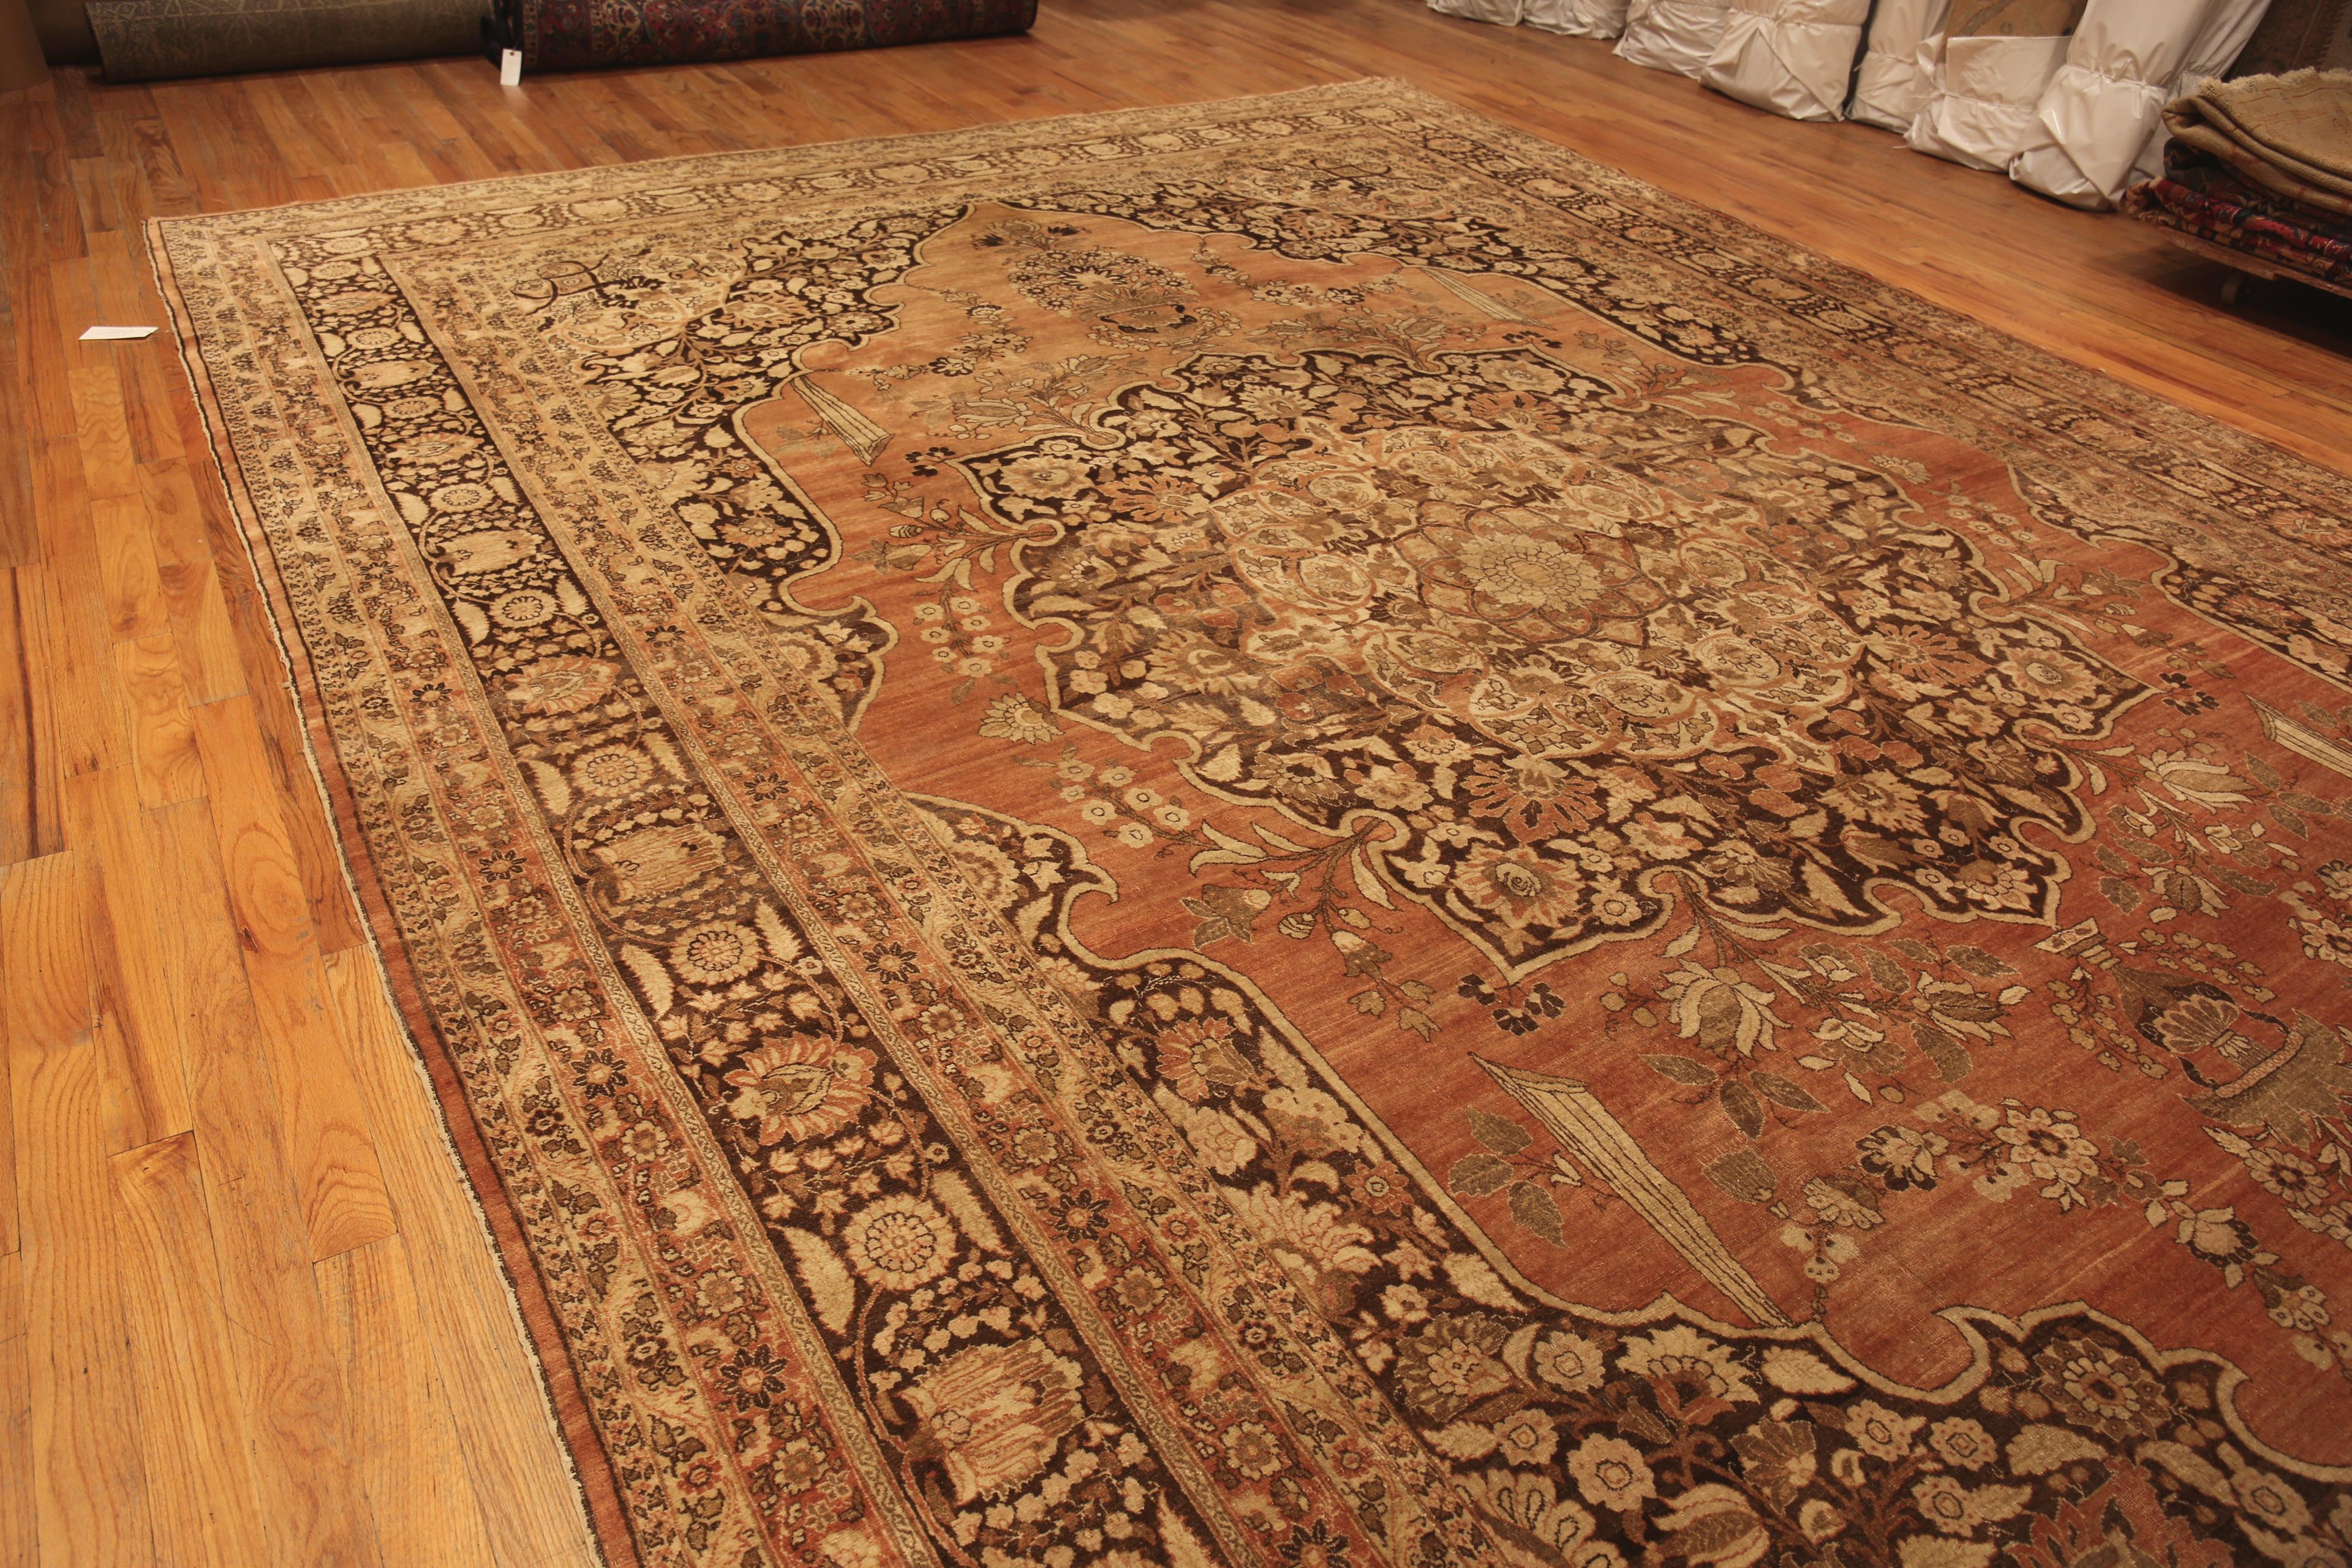 Large Antique Persian Tabriz Area Rug, Country of Origin / Rug Type: Persian Rugs, Circa date: 1900. Size: 12 ft 6 in x 18 ft 3 in (3.81 m x 5.56 m).
 